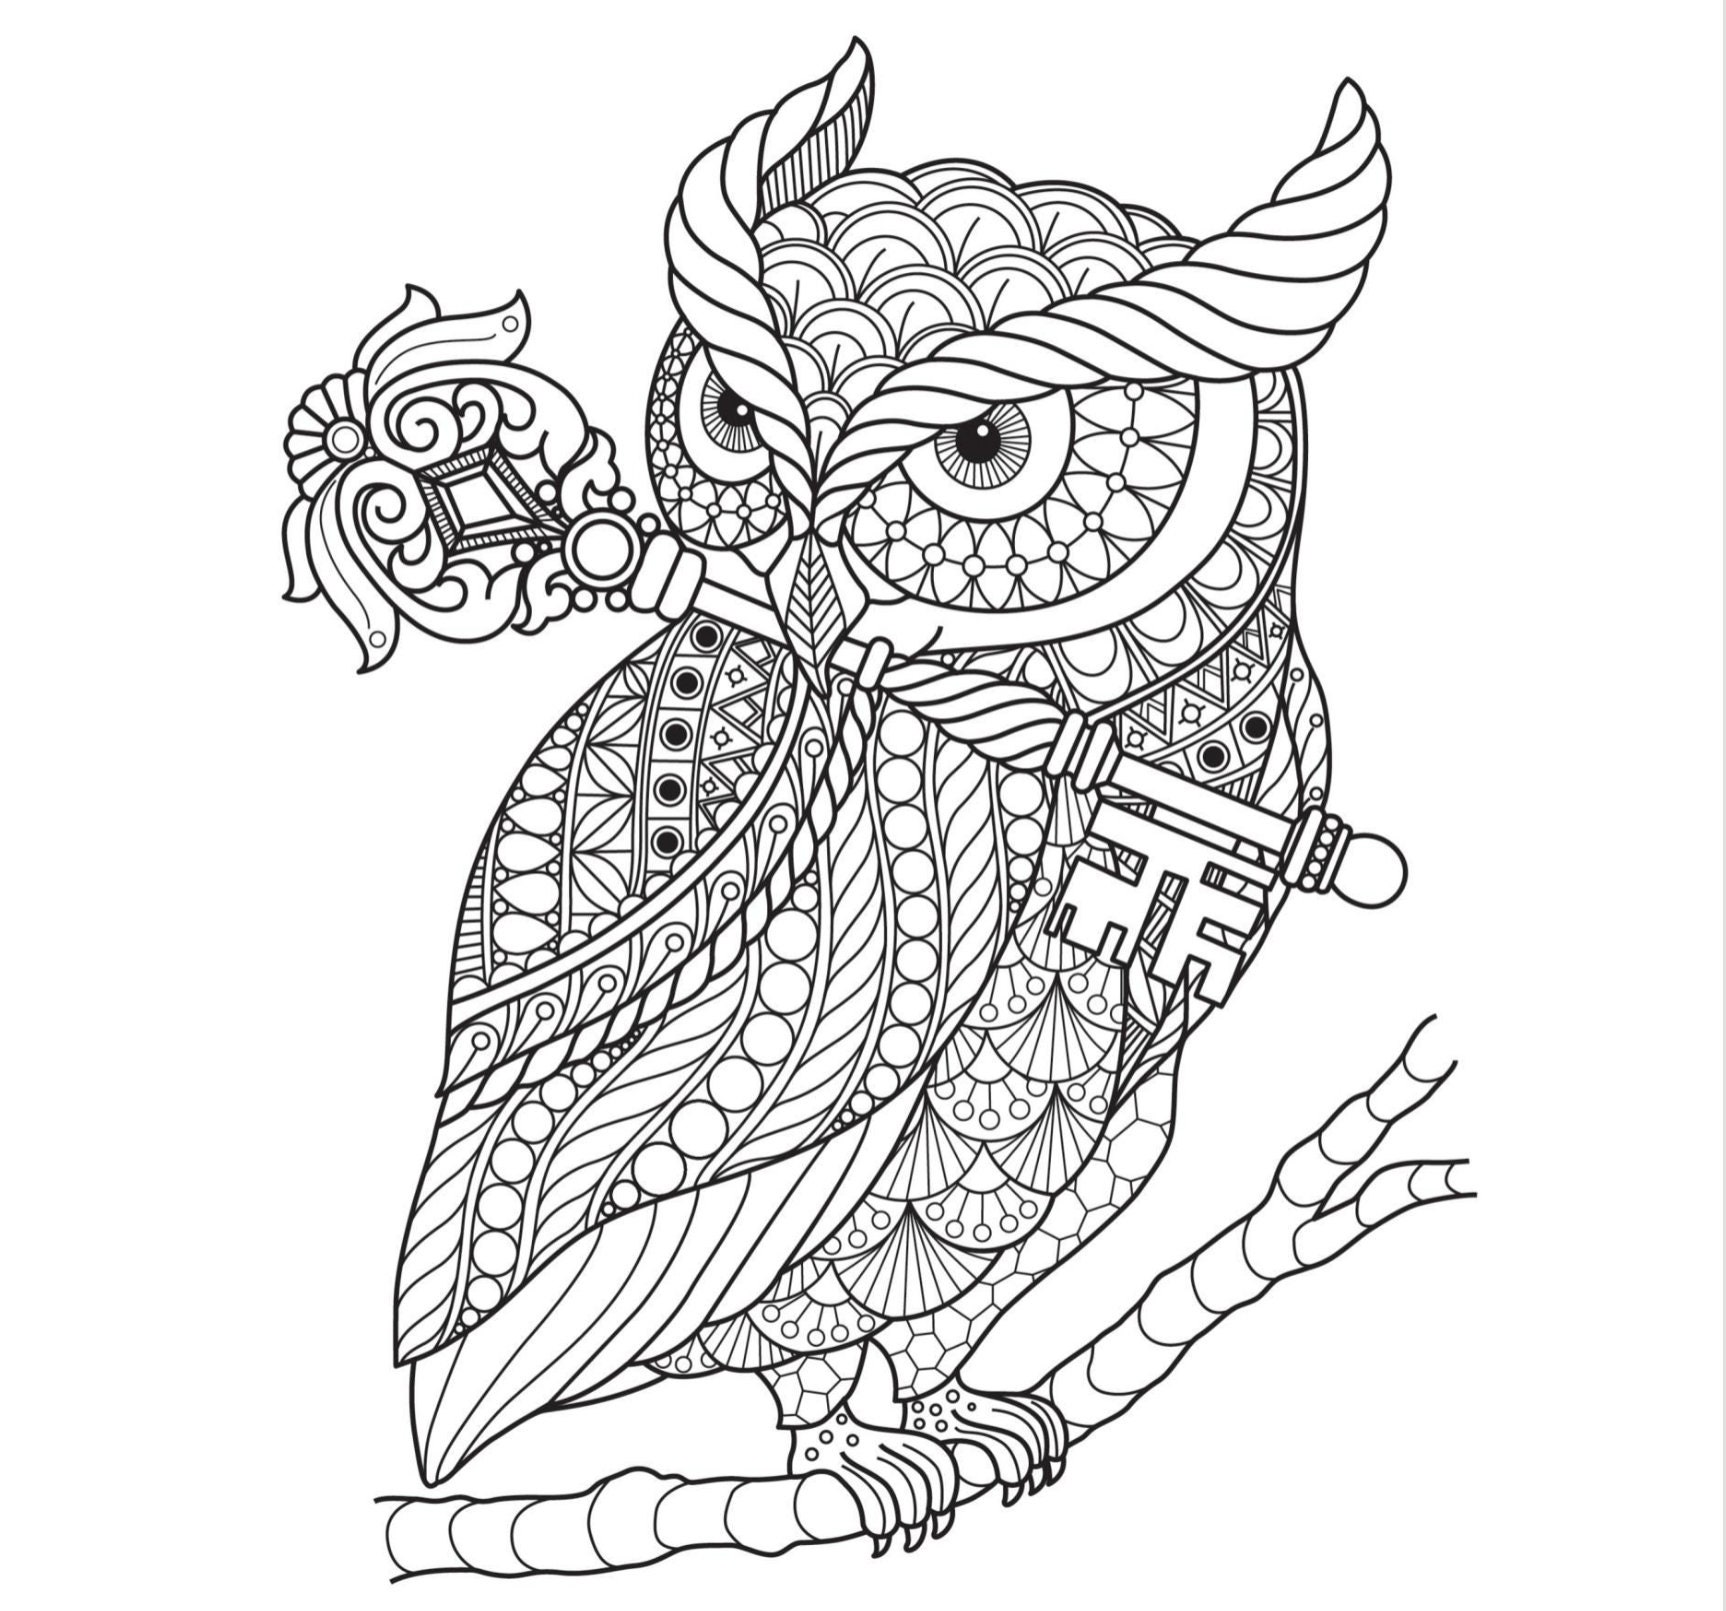 Geometric Animals Coloring Books for Adults: A stress relieving adult  coloring book with unique animal and geometric designs! Owls, Elephants,  Llamas